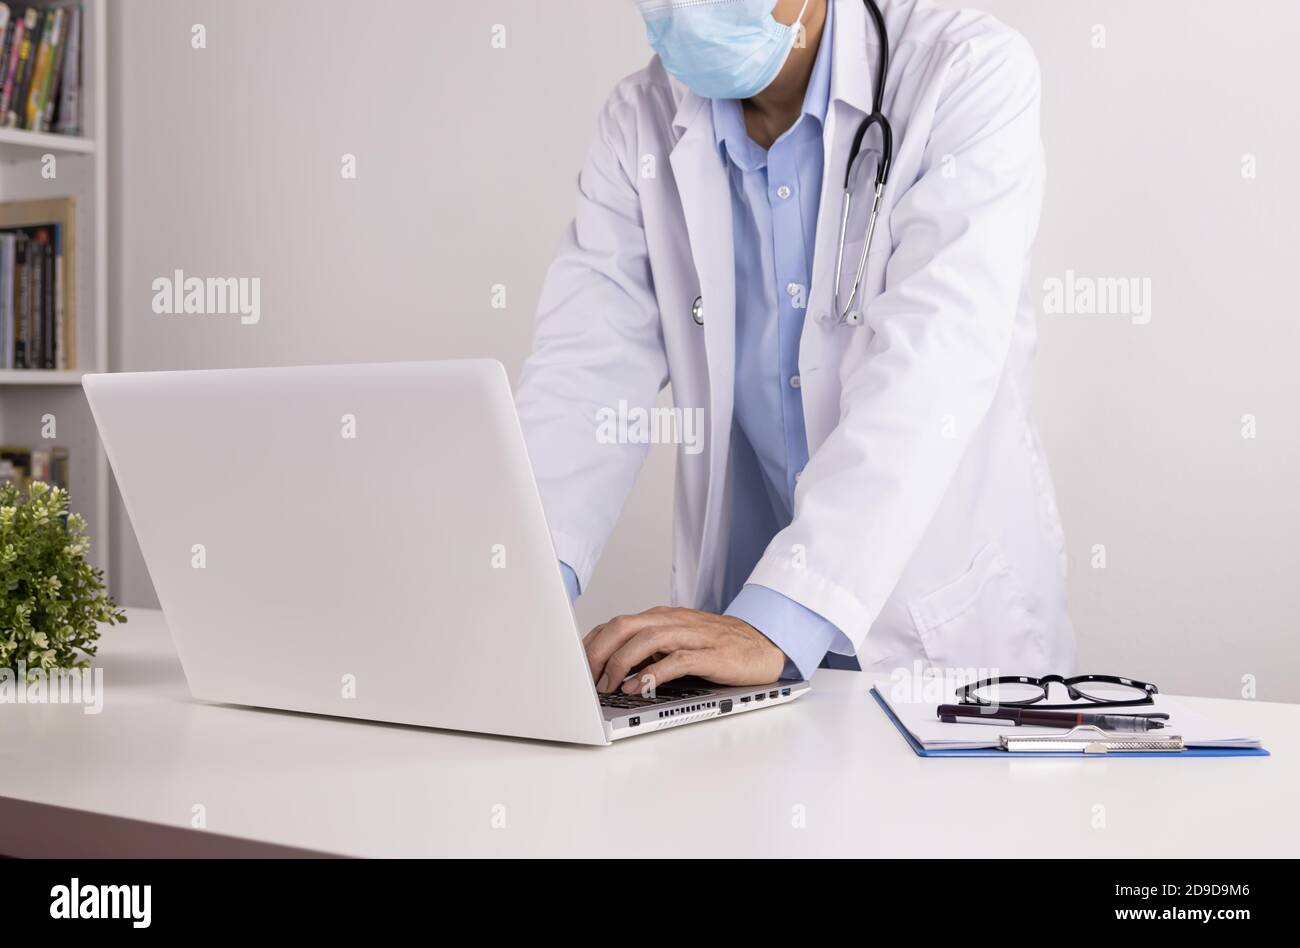 Young Asian Doctor Man in Lab Coat or Gown with Stethoscope in Stand Pose Wear Face Mask Using Laptop Computer on Doctor Table in Office Stock Photo